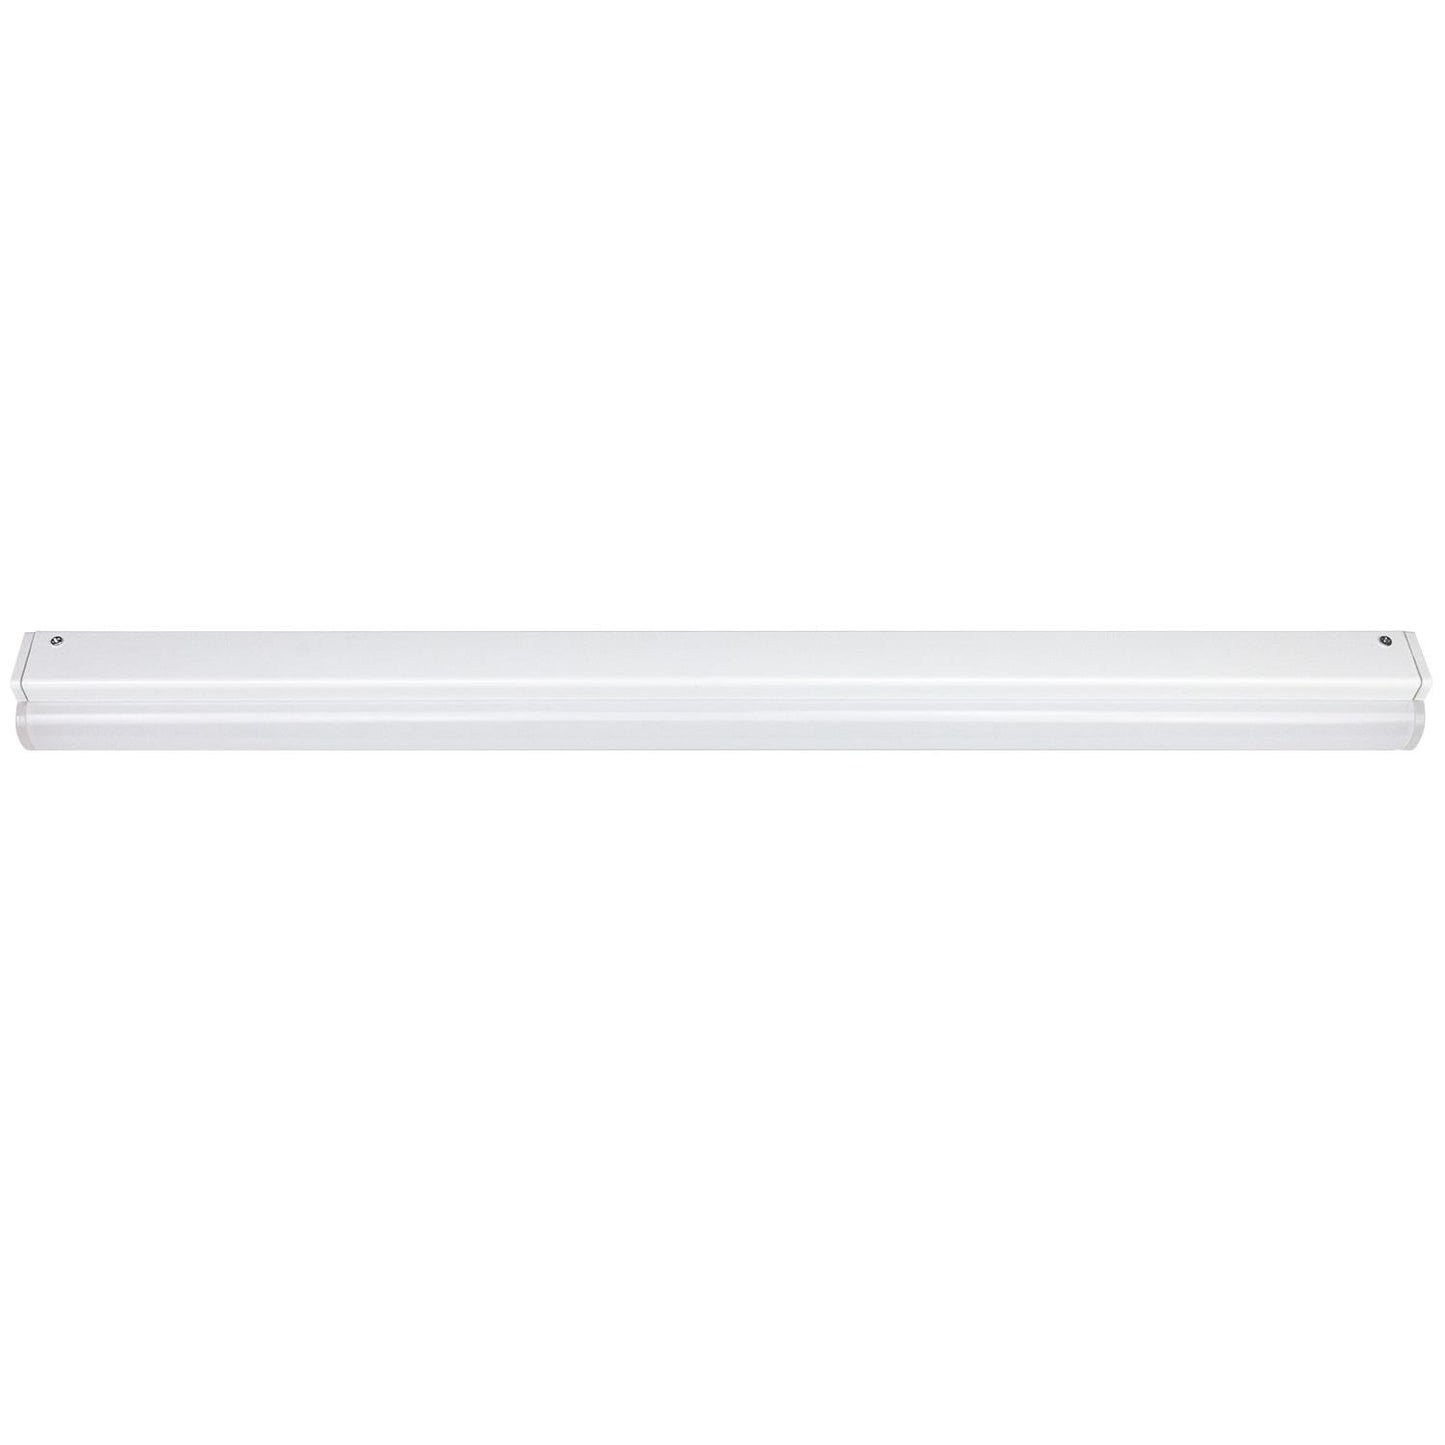 Sunlite 4 Foot one light Economy Channel LED Fixture